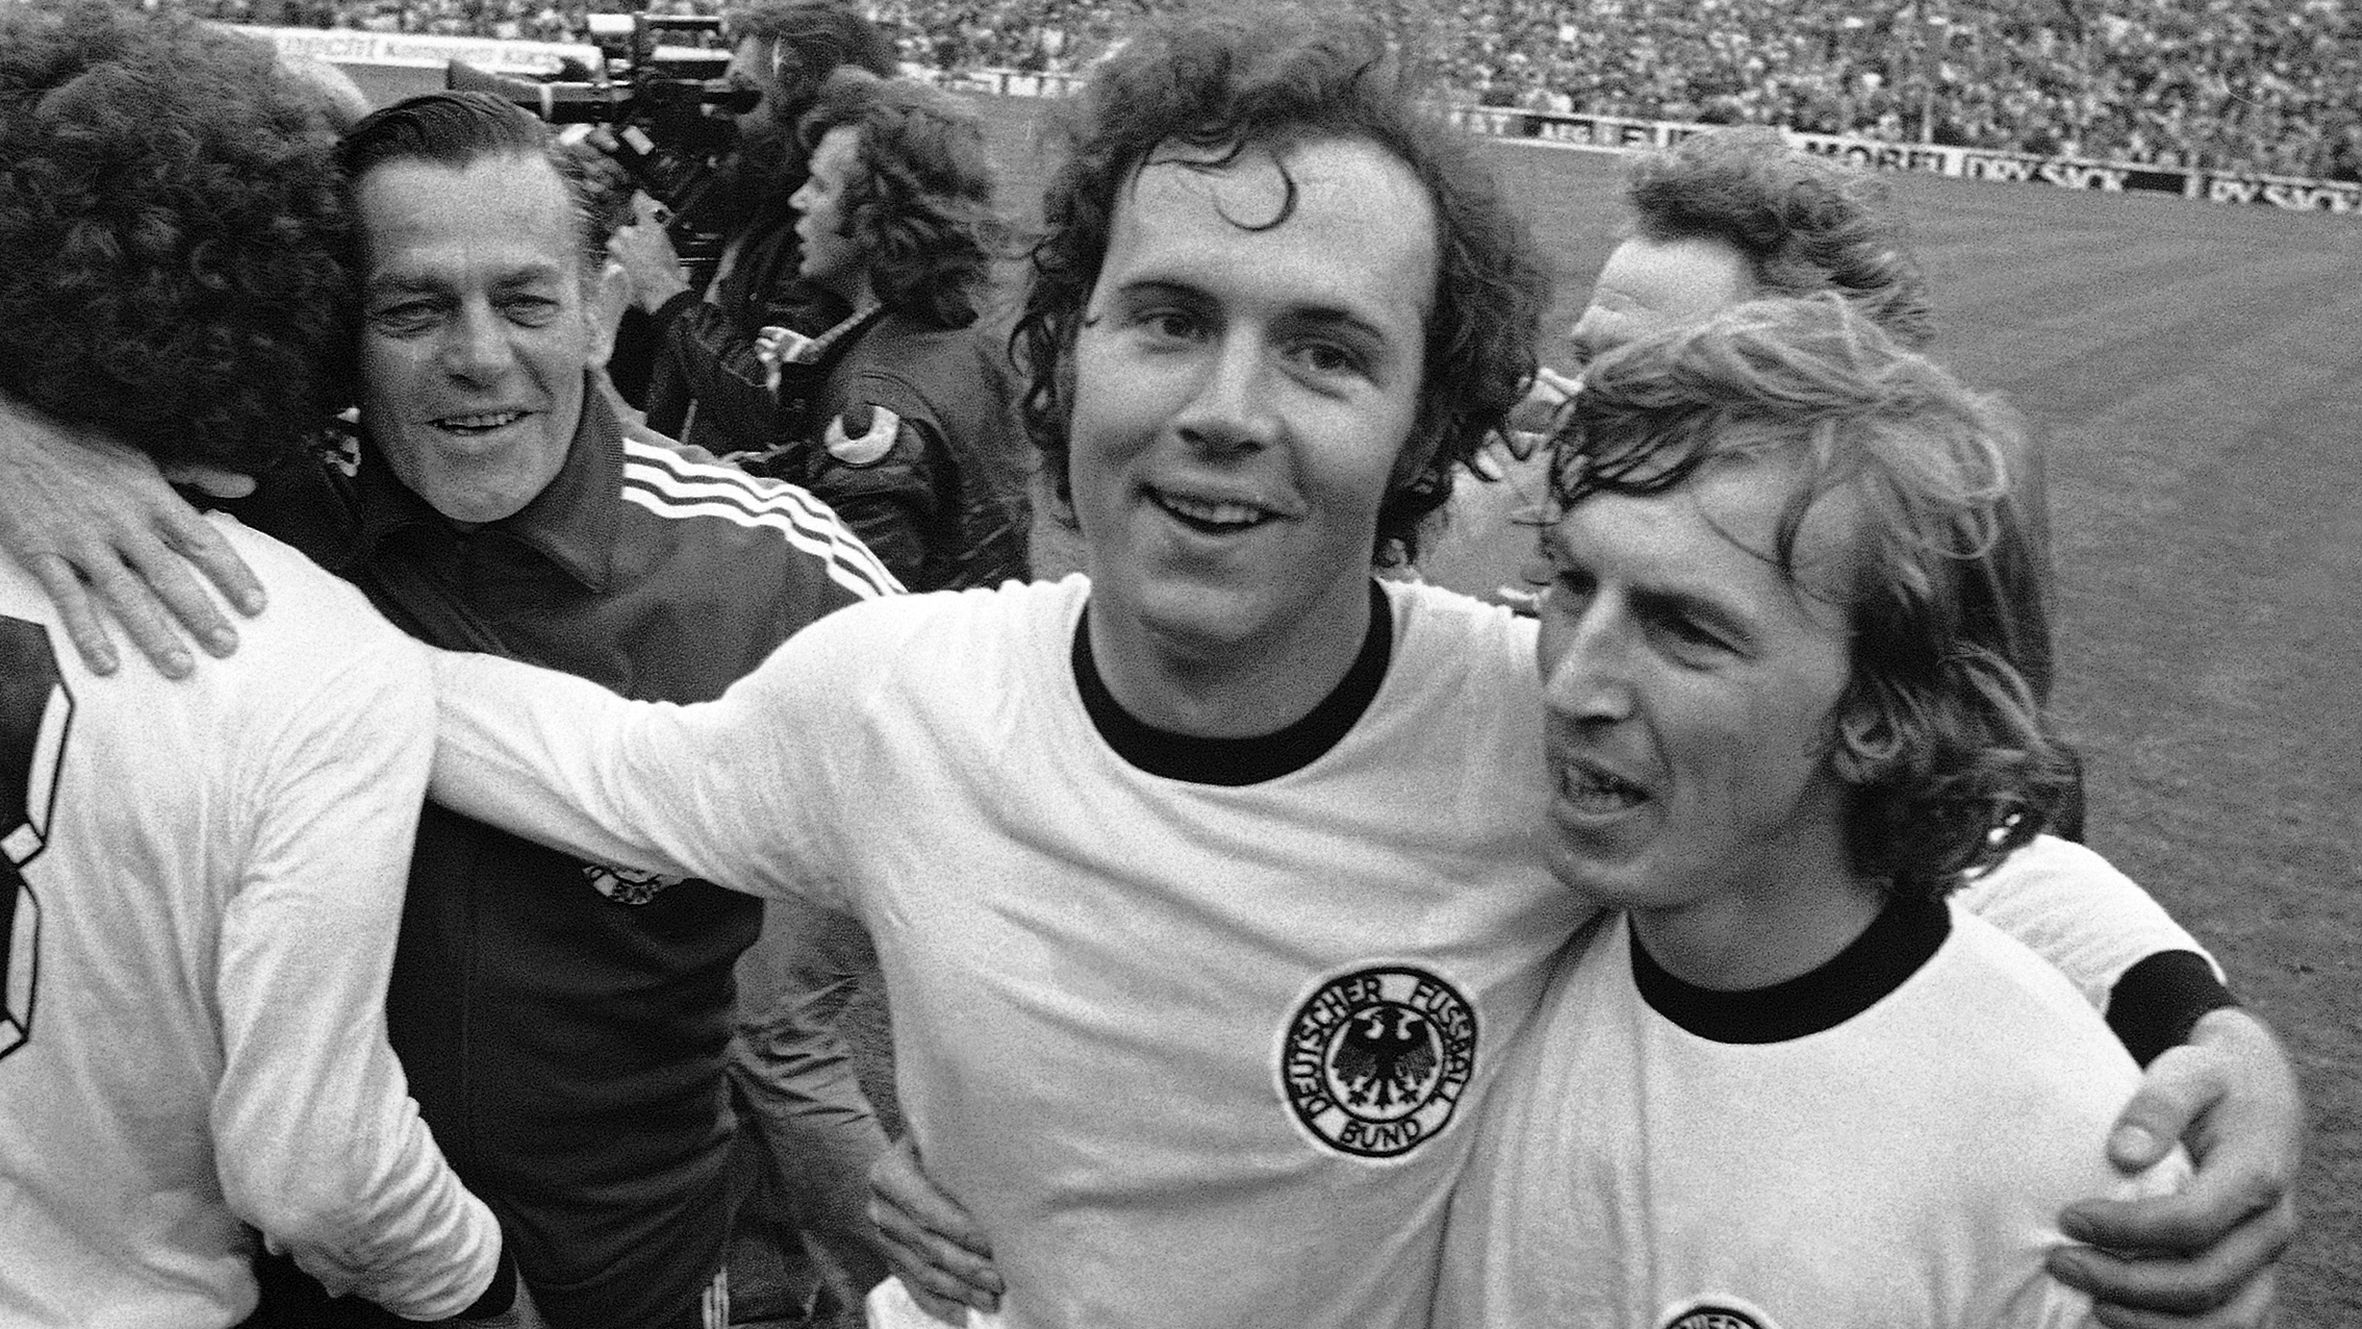 German World Cup legend who 'inspired generations', Franz Beckenbauer, dead at 78